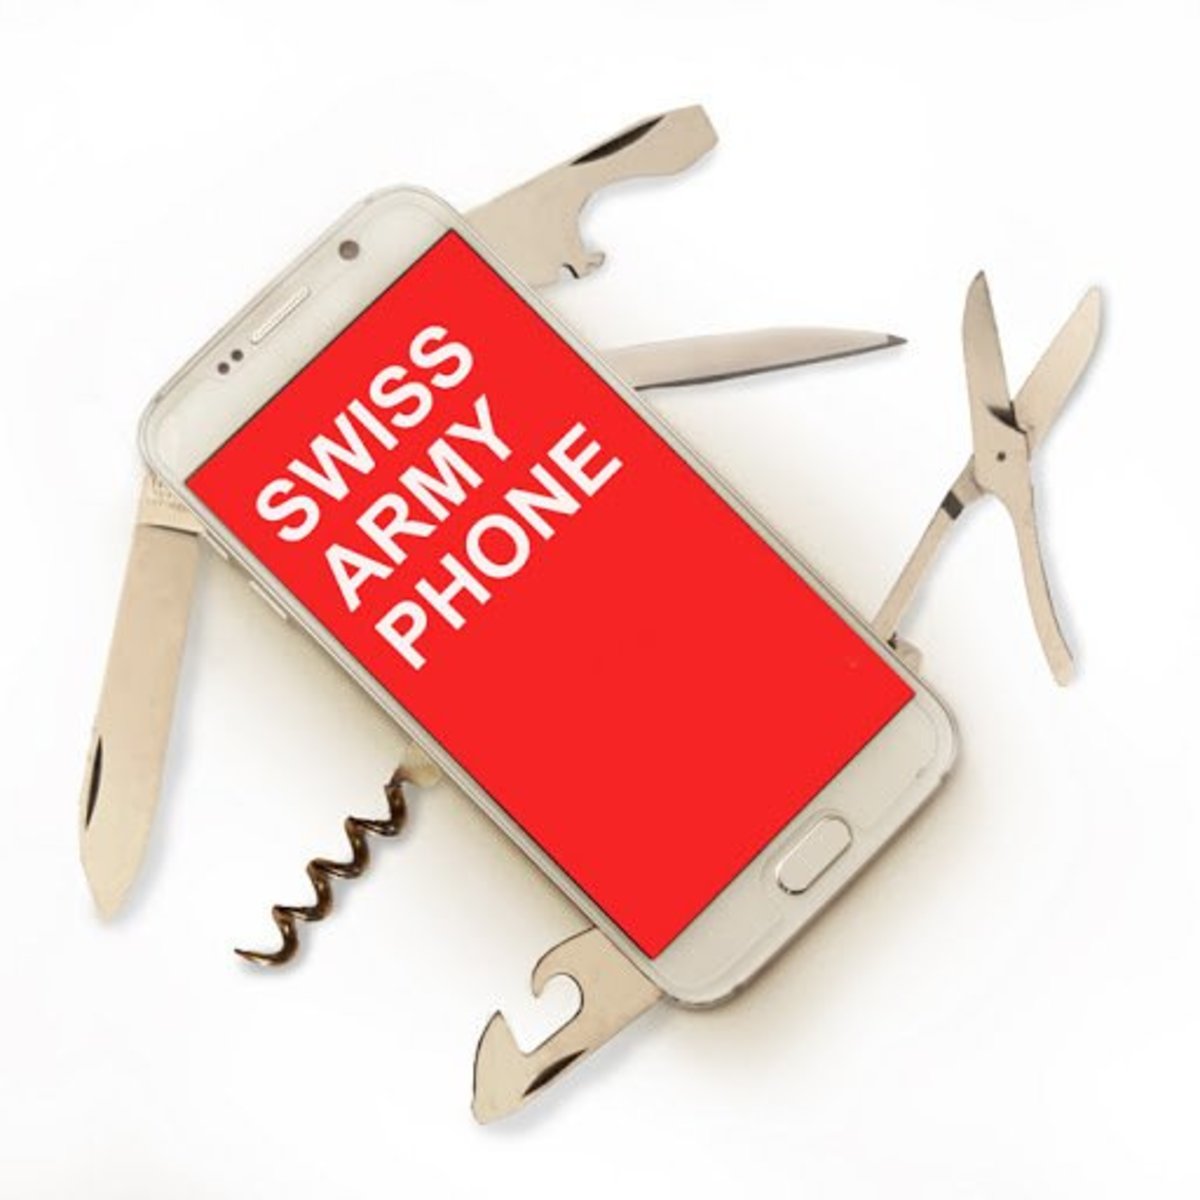 Is a phone like a swiss army knife? Lots of skills but not good at any of them?